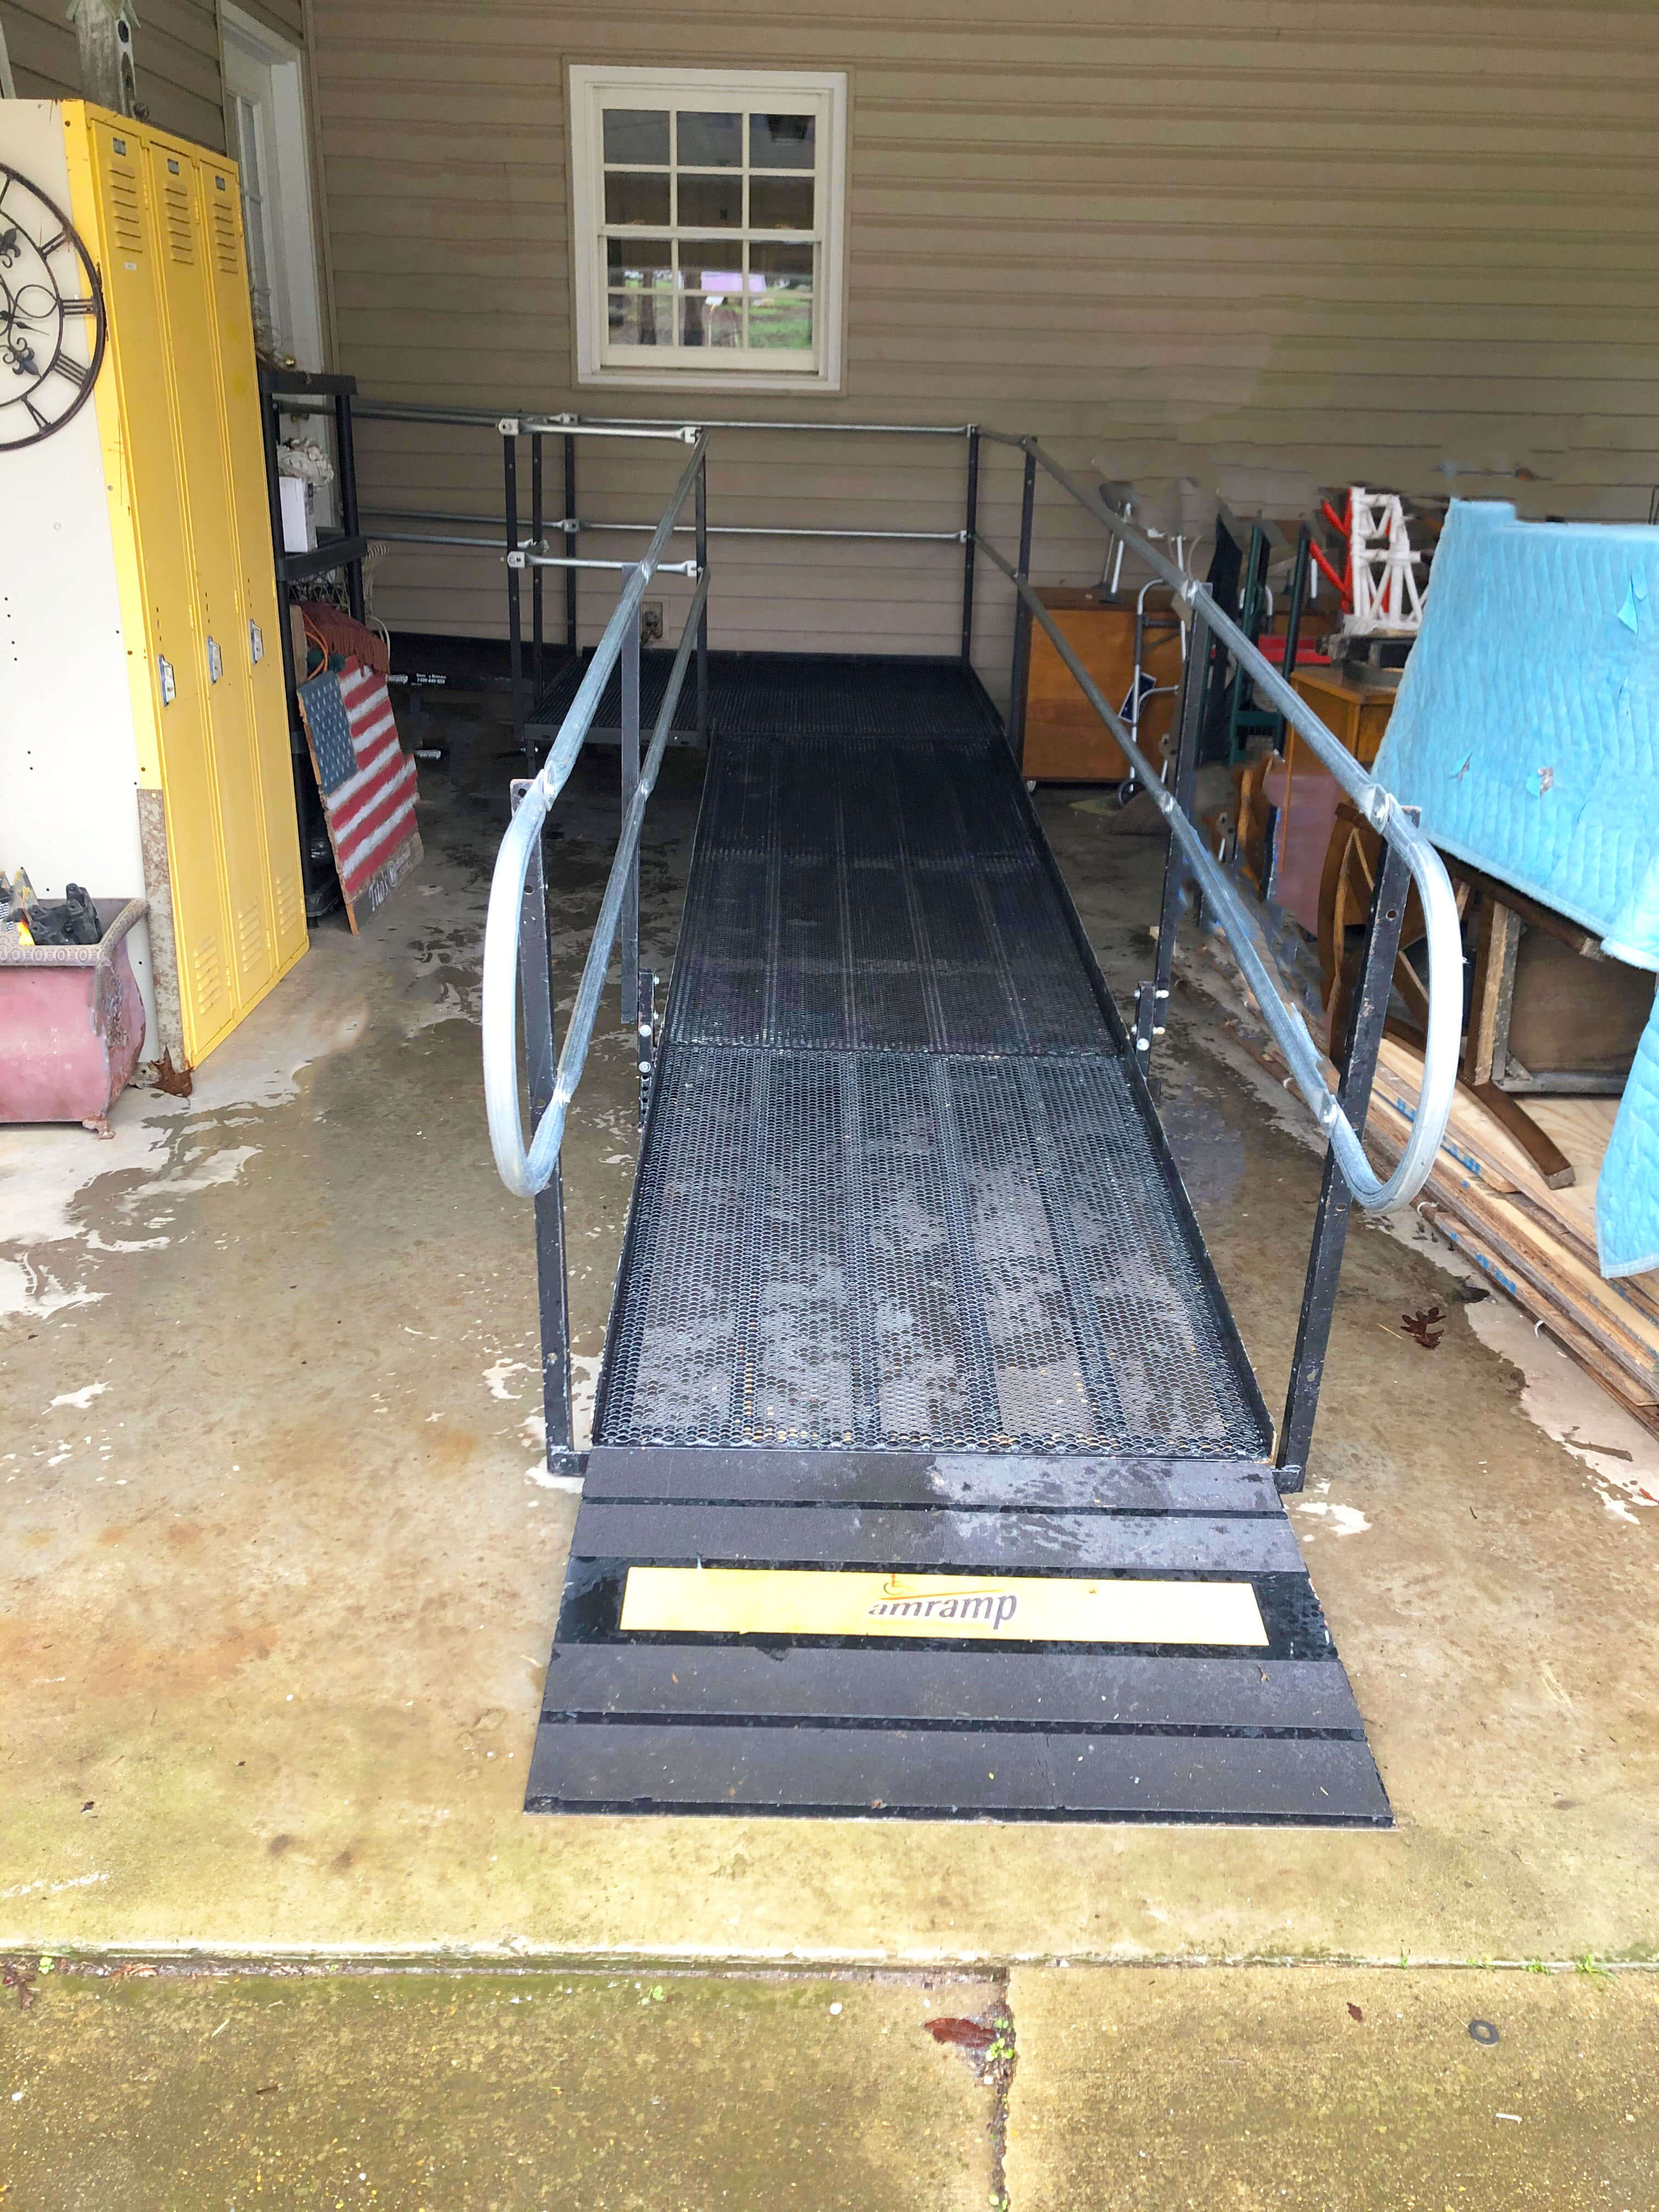 Another installation completed by our Birmingham, AL team. The team headed out to Tuscaloosa, AL to set up this residential ramp for a customer.